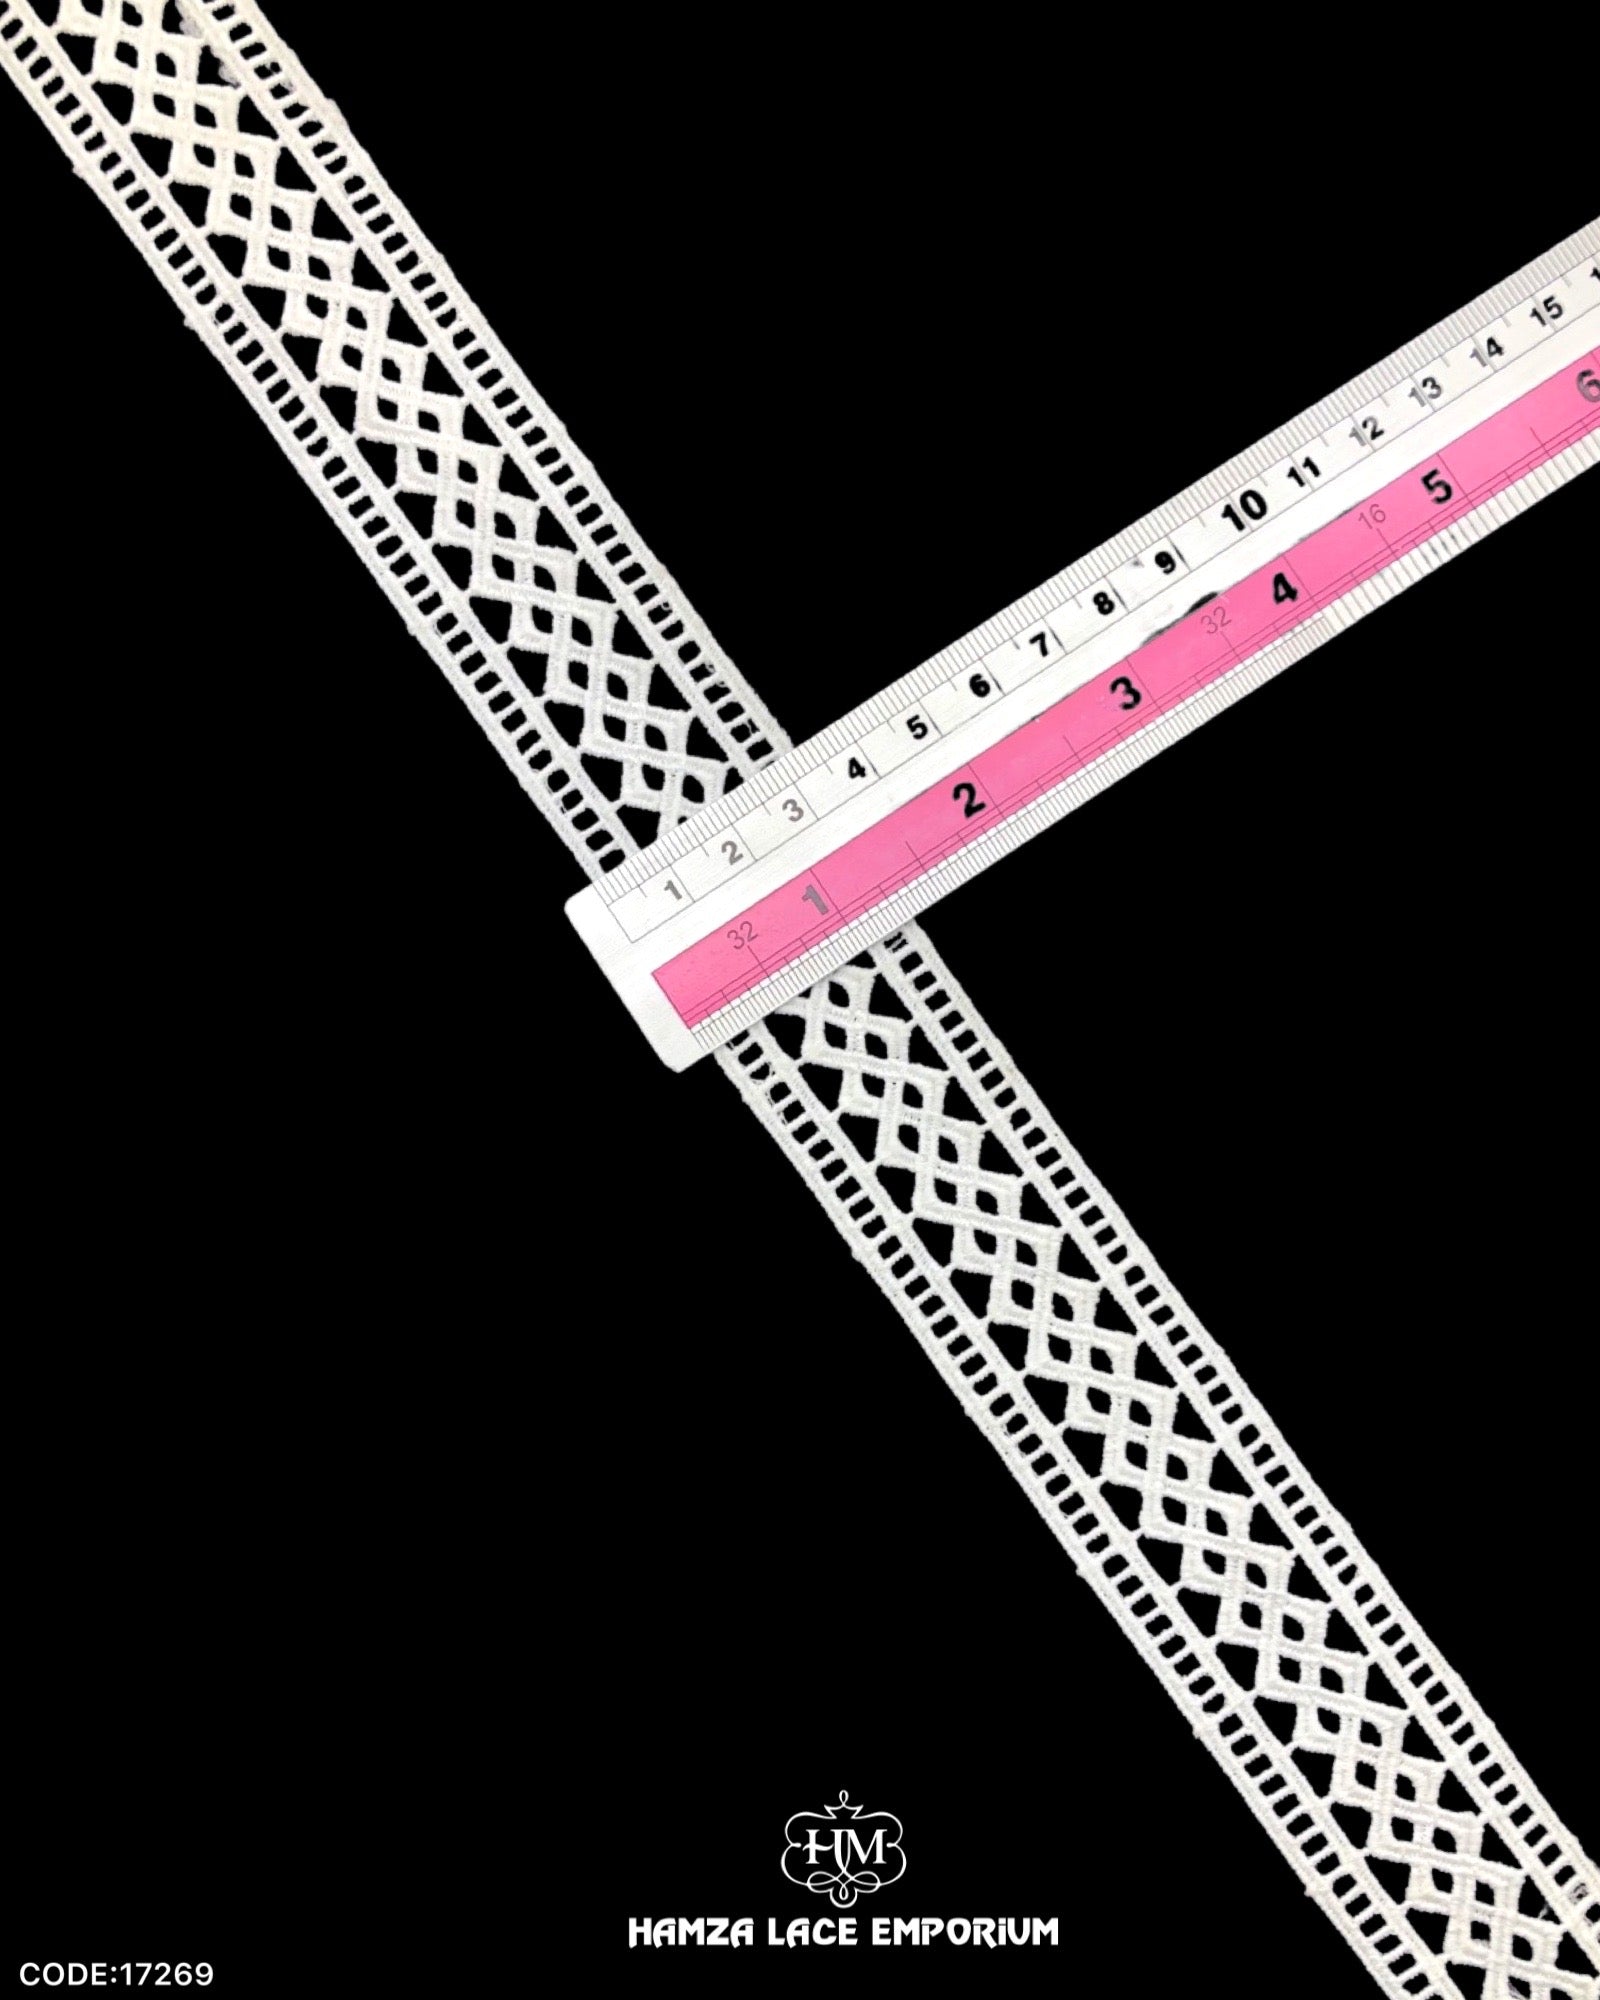 'Center Filling Lace 17269' displayed with a ruler to indicate its width as '1.5' inches.